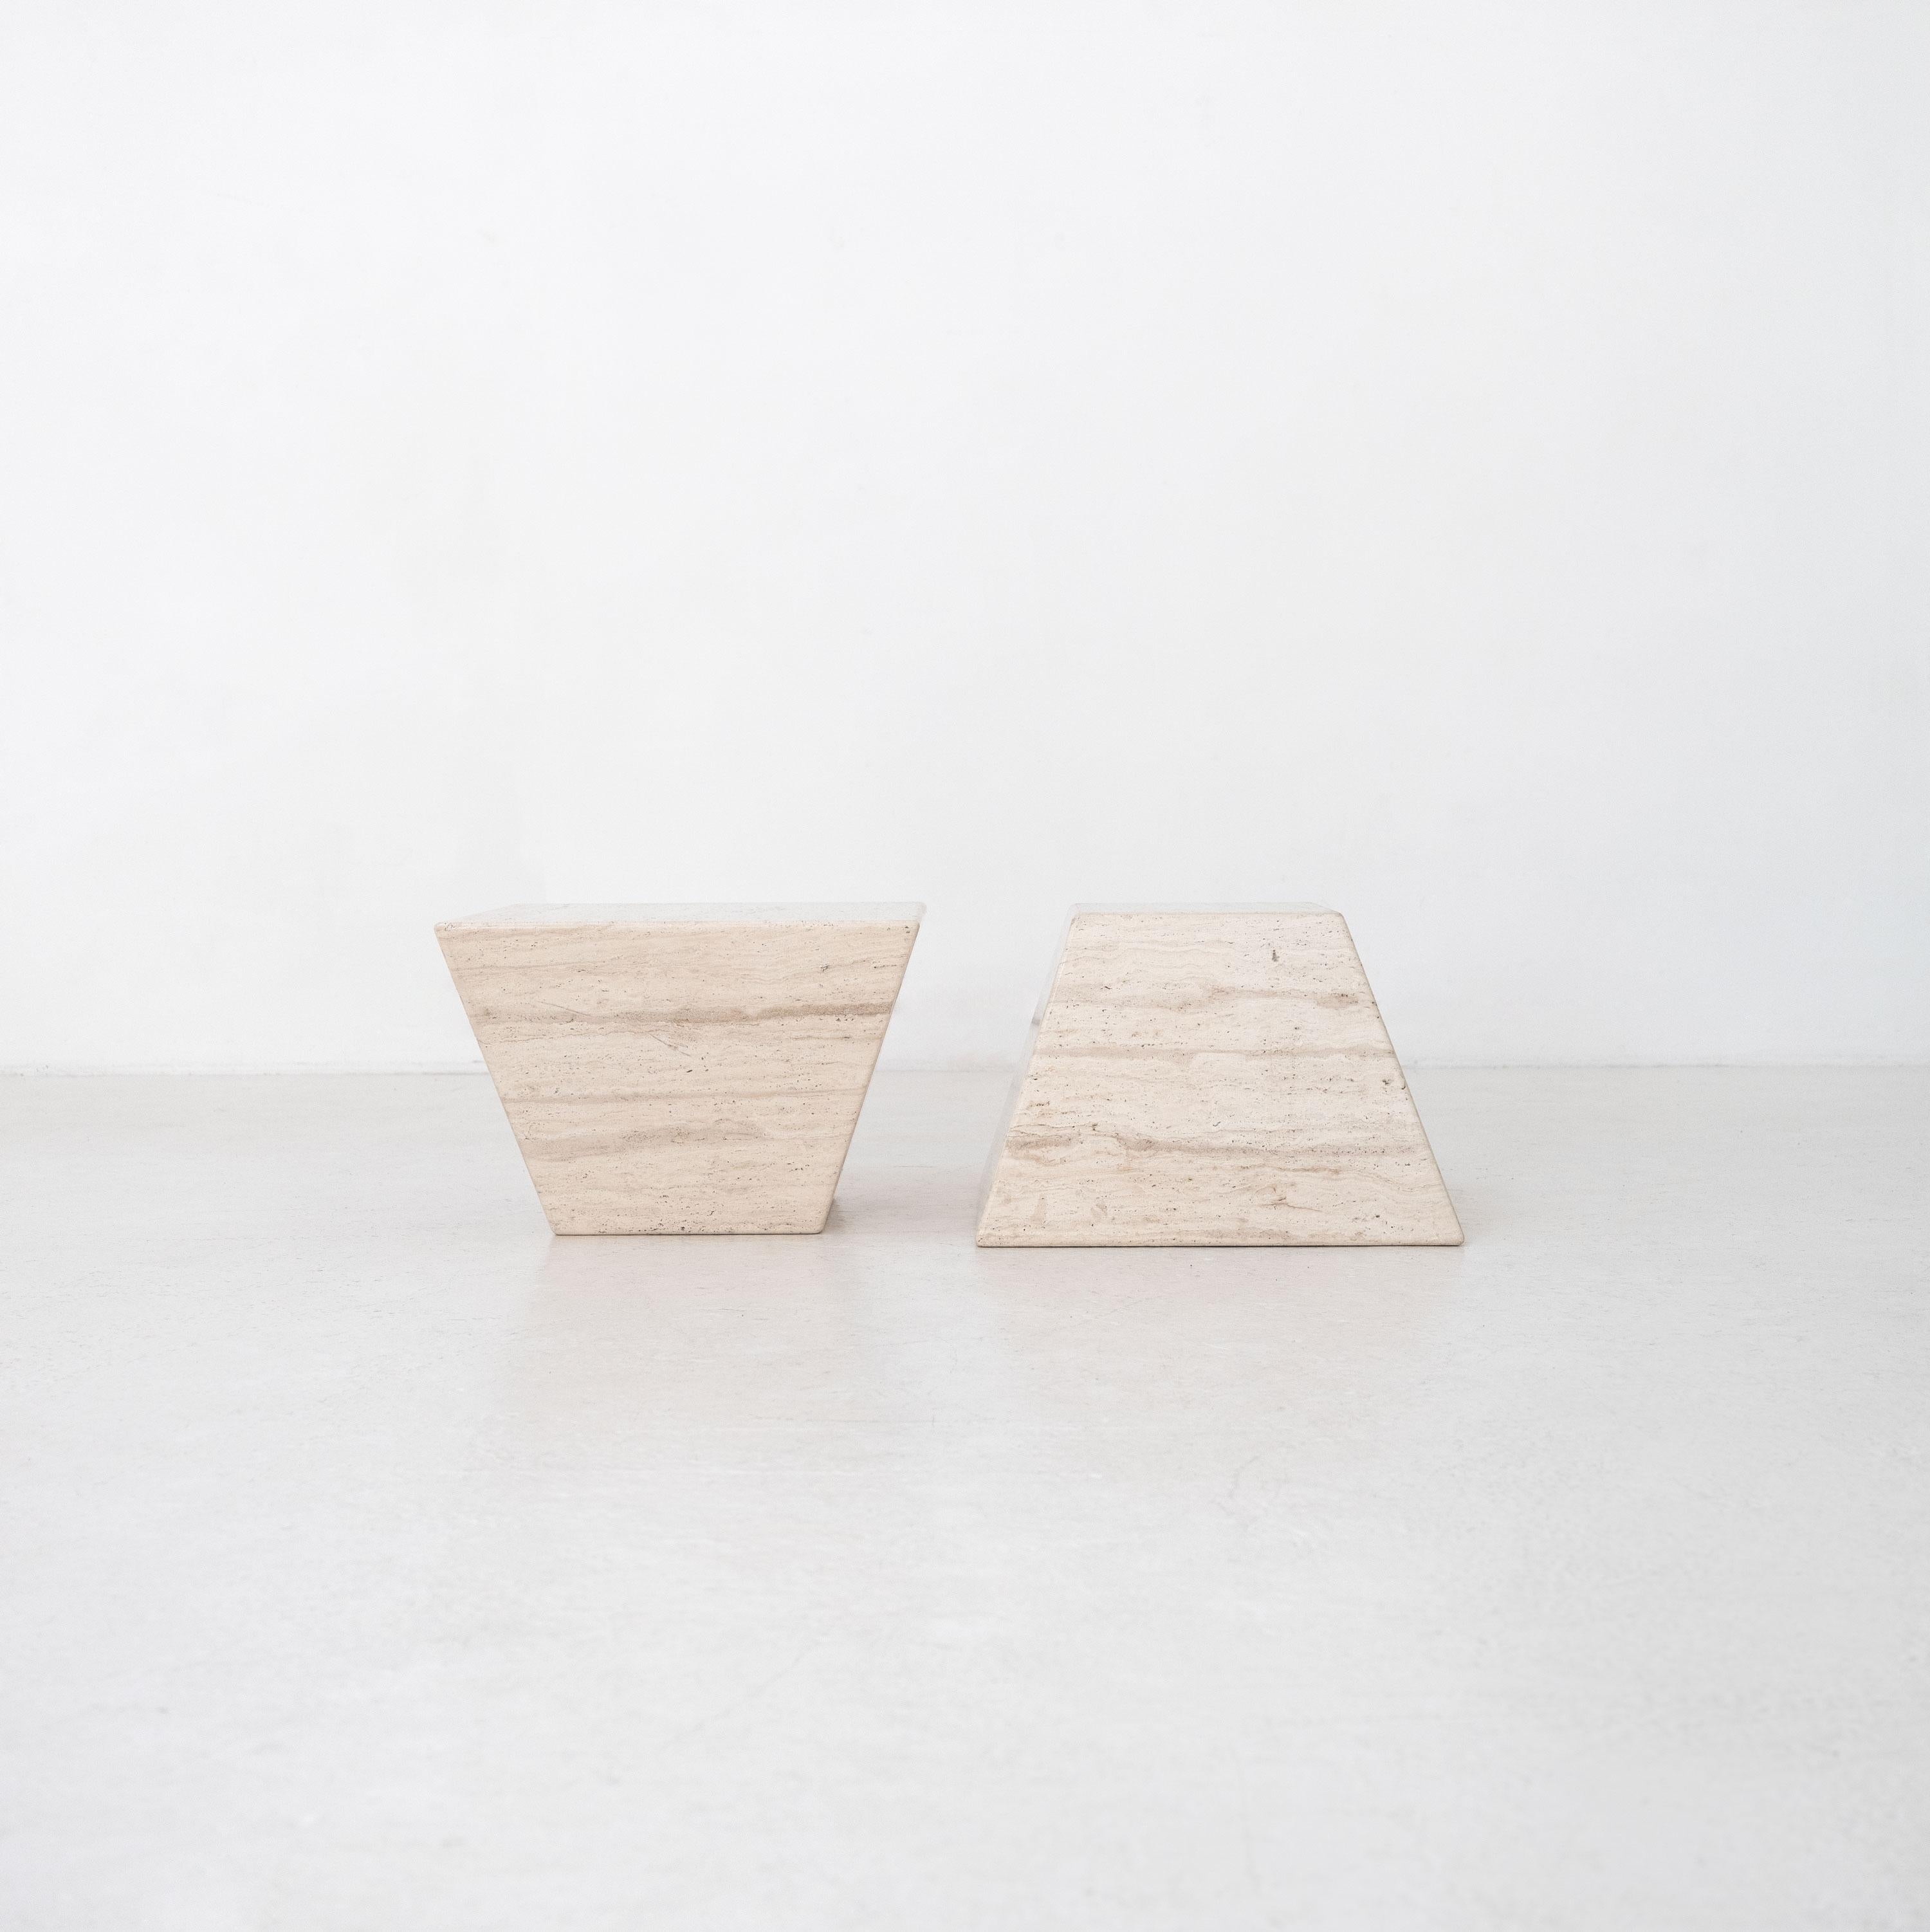 Two large frustum shaped travertine tables, Italy, c.1970.